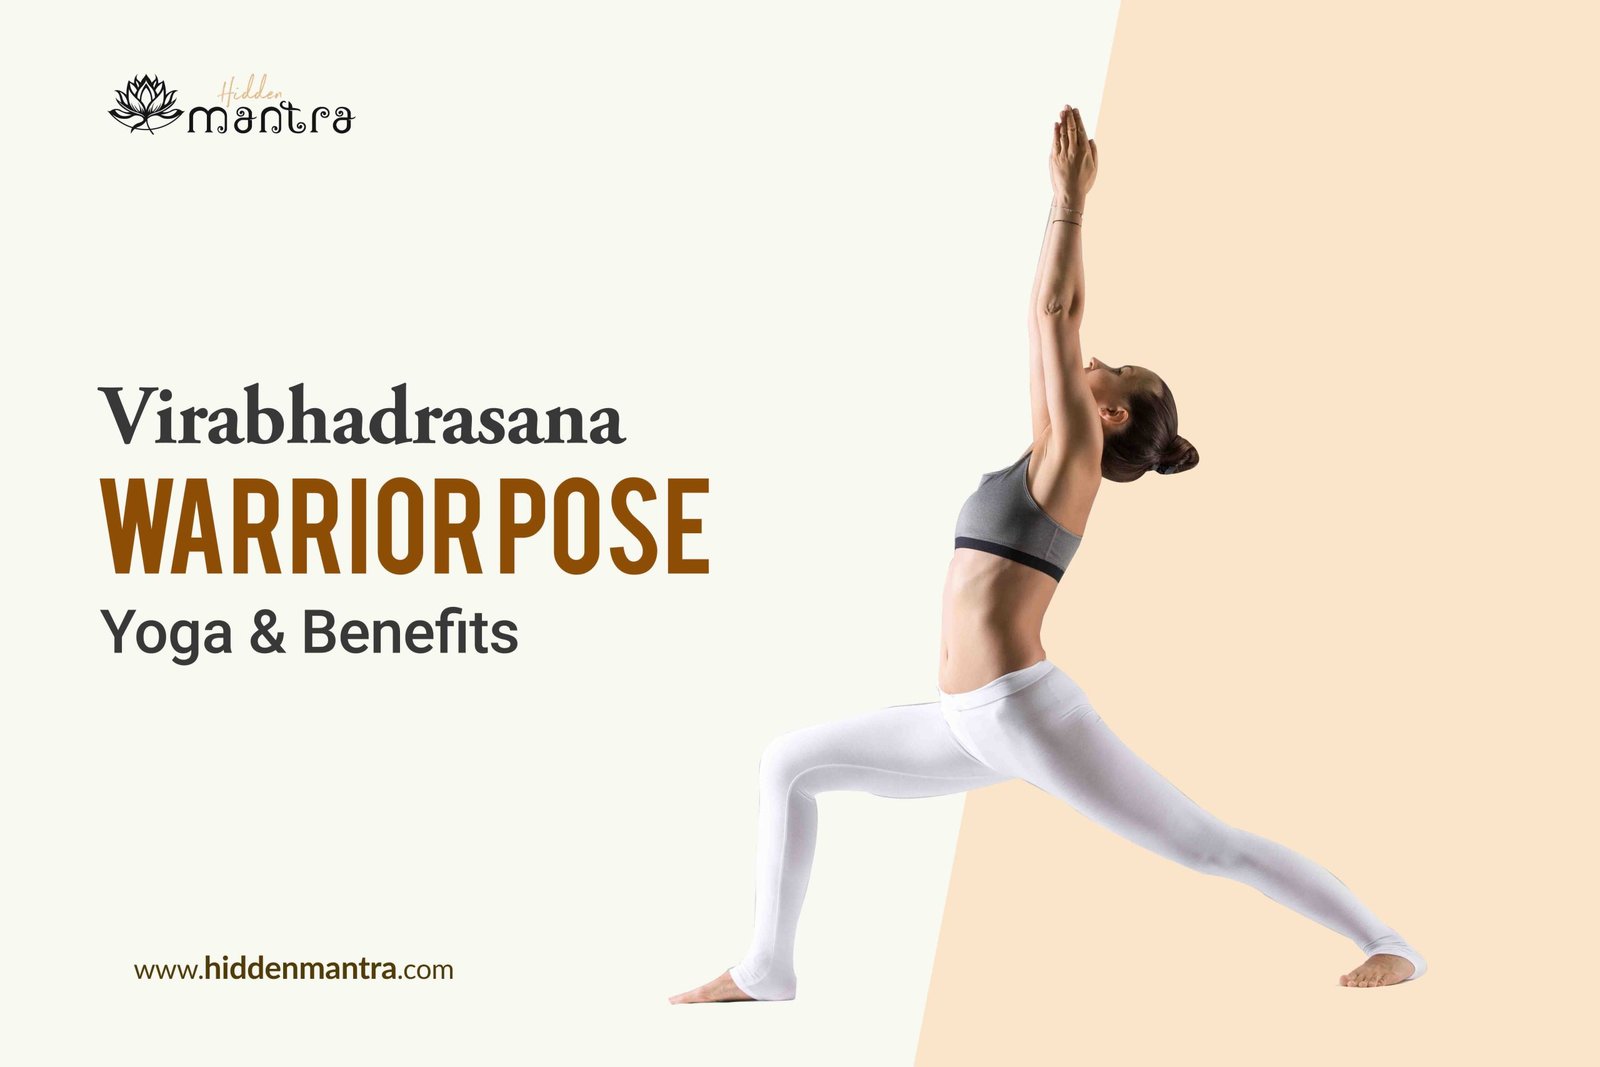 Karma Yoga Asanas And Benefits That You Should Know | Styles At Life